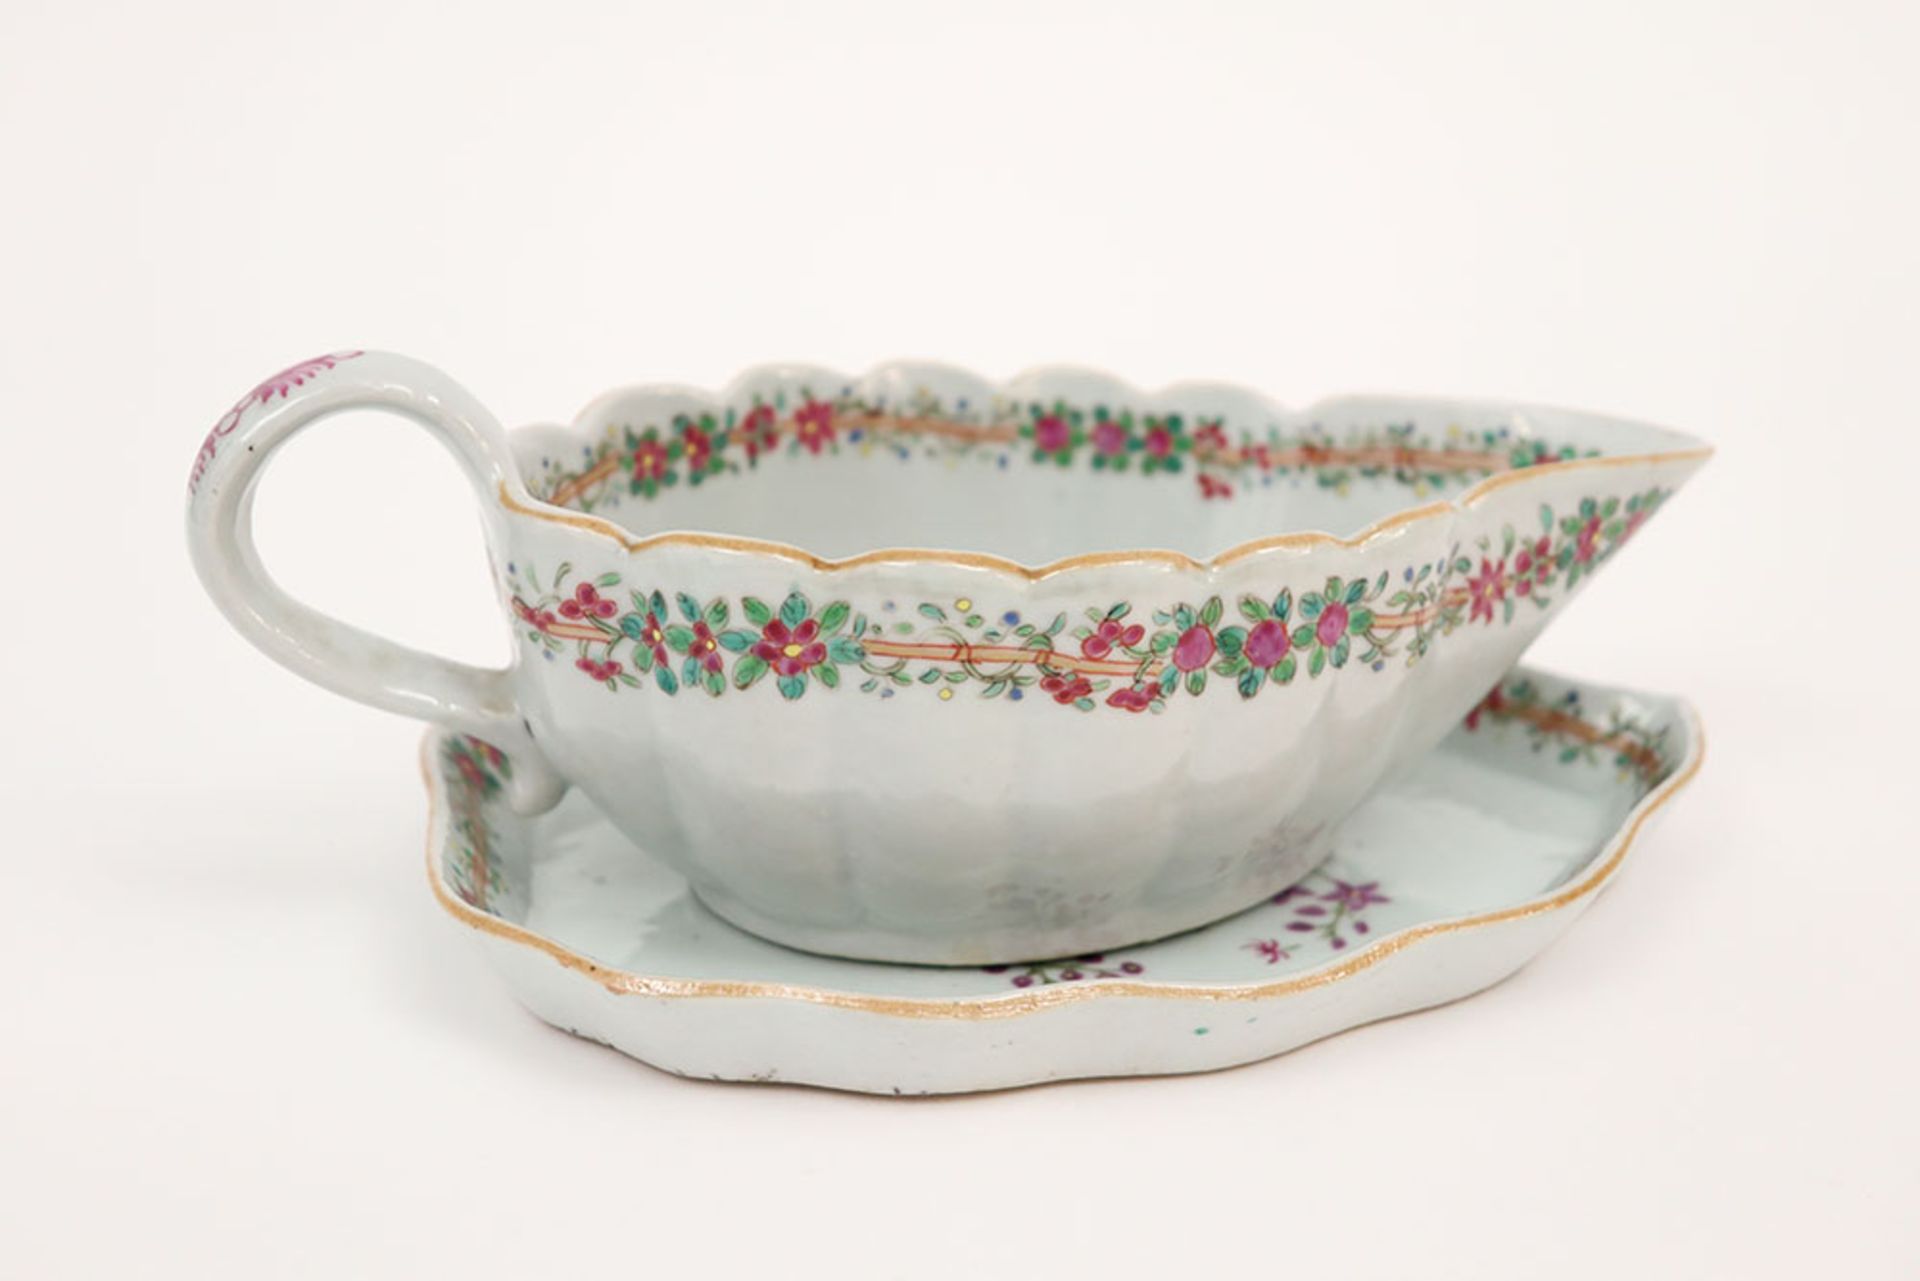 set of a 18th Cent. Chinese sauce boat and its dish in porcelain with a 'Famille Rose' flowers decor